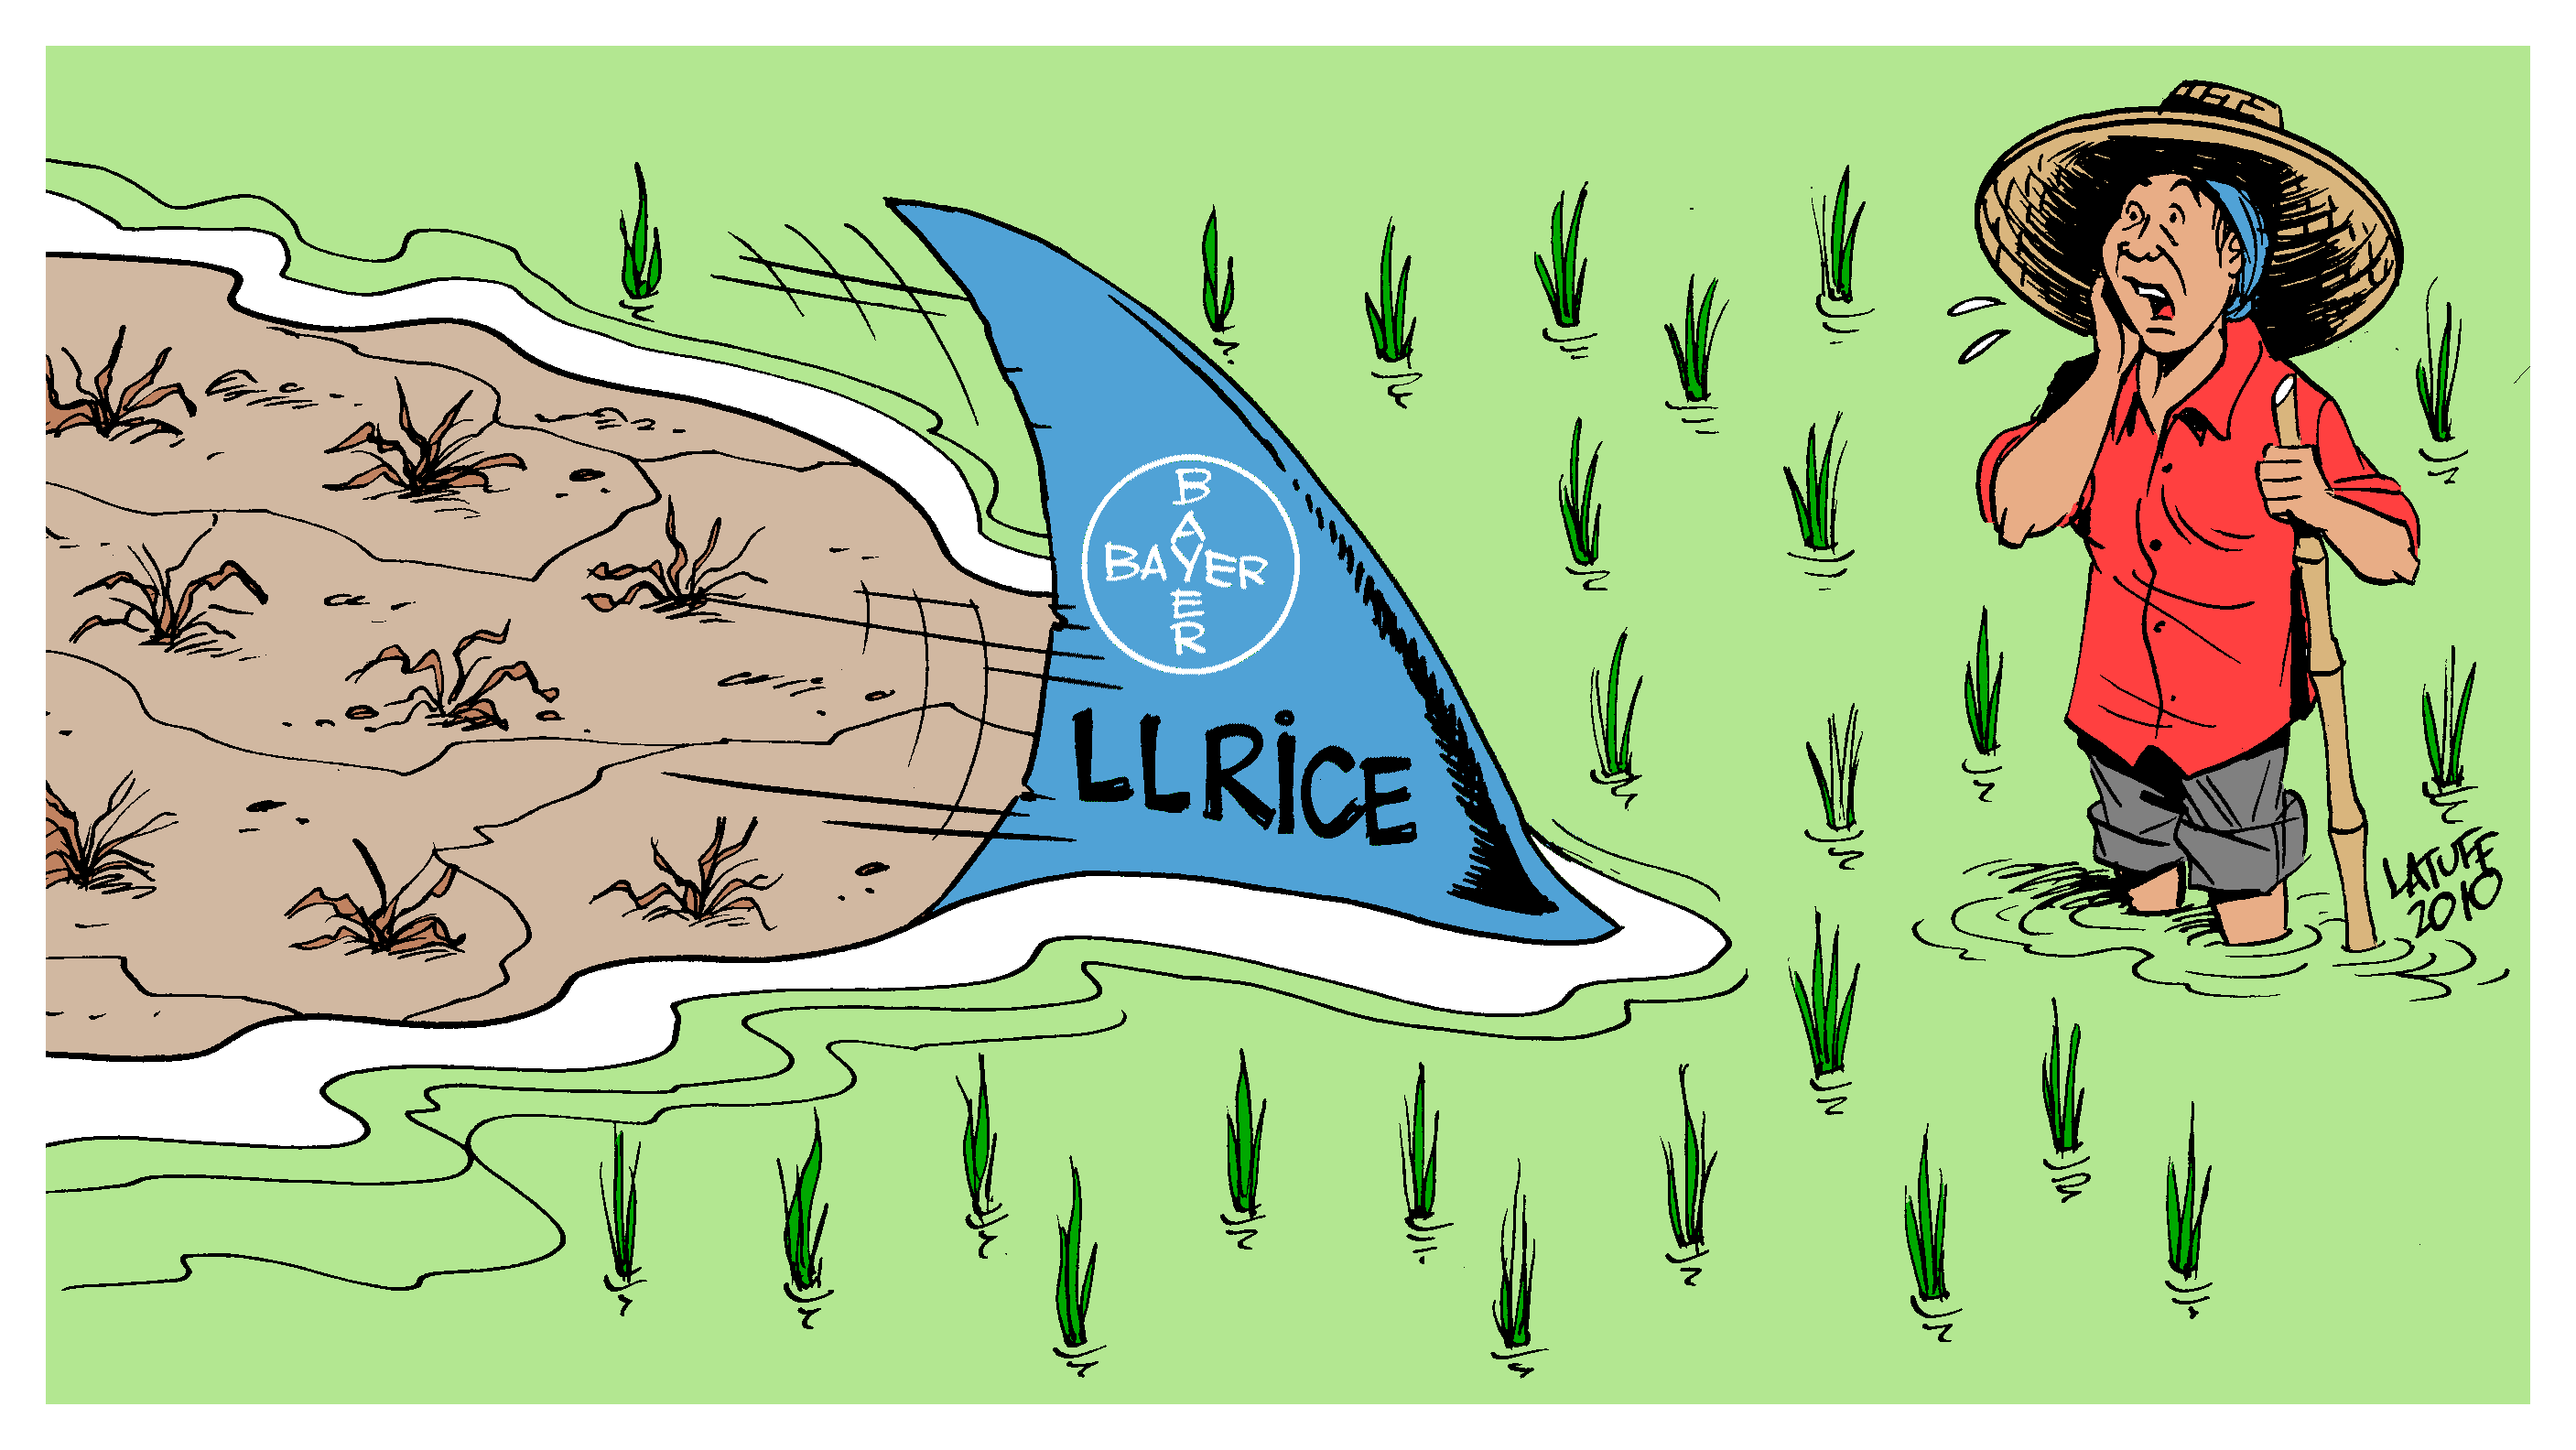 Danger! Bayer genetic modified rice! (by Latuff) : Indybay.